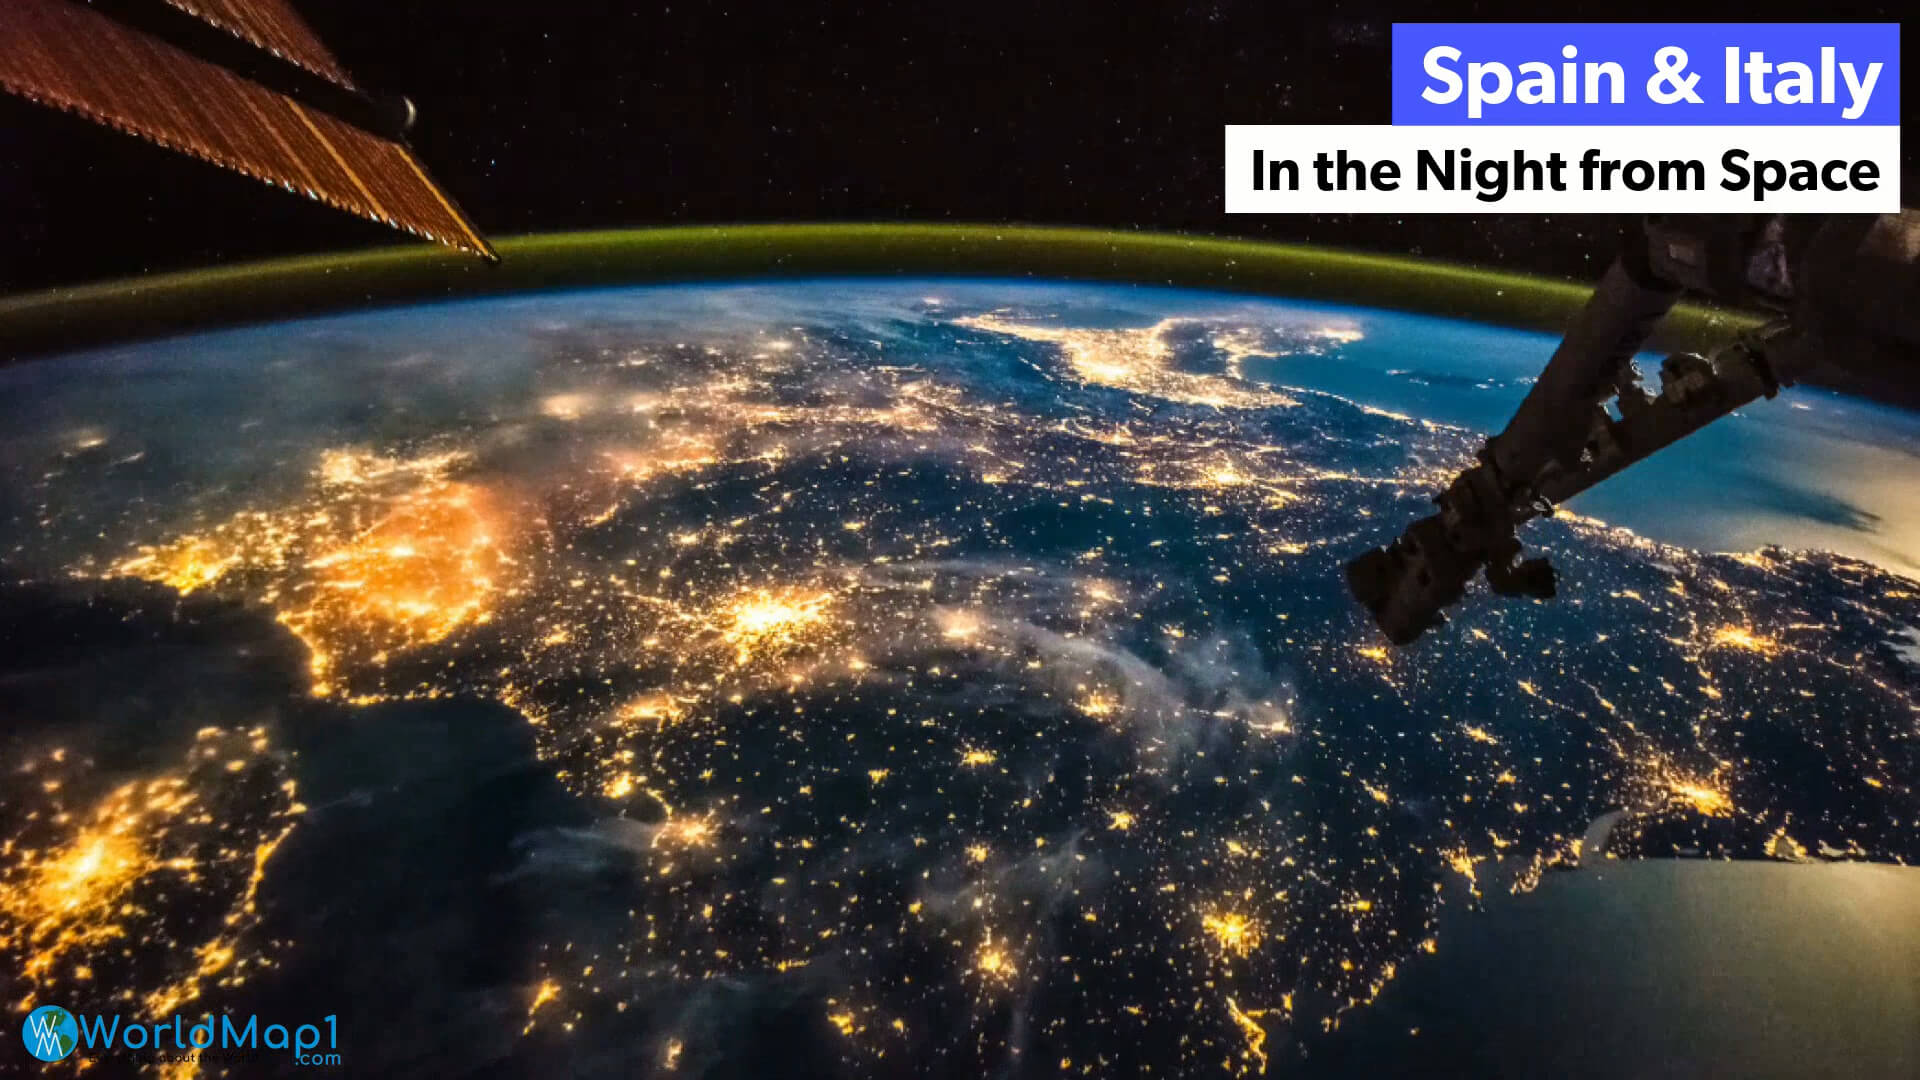 Spain and Italy in the Night from Space